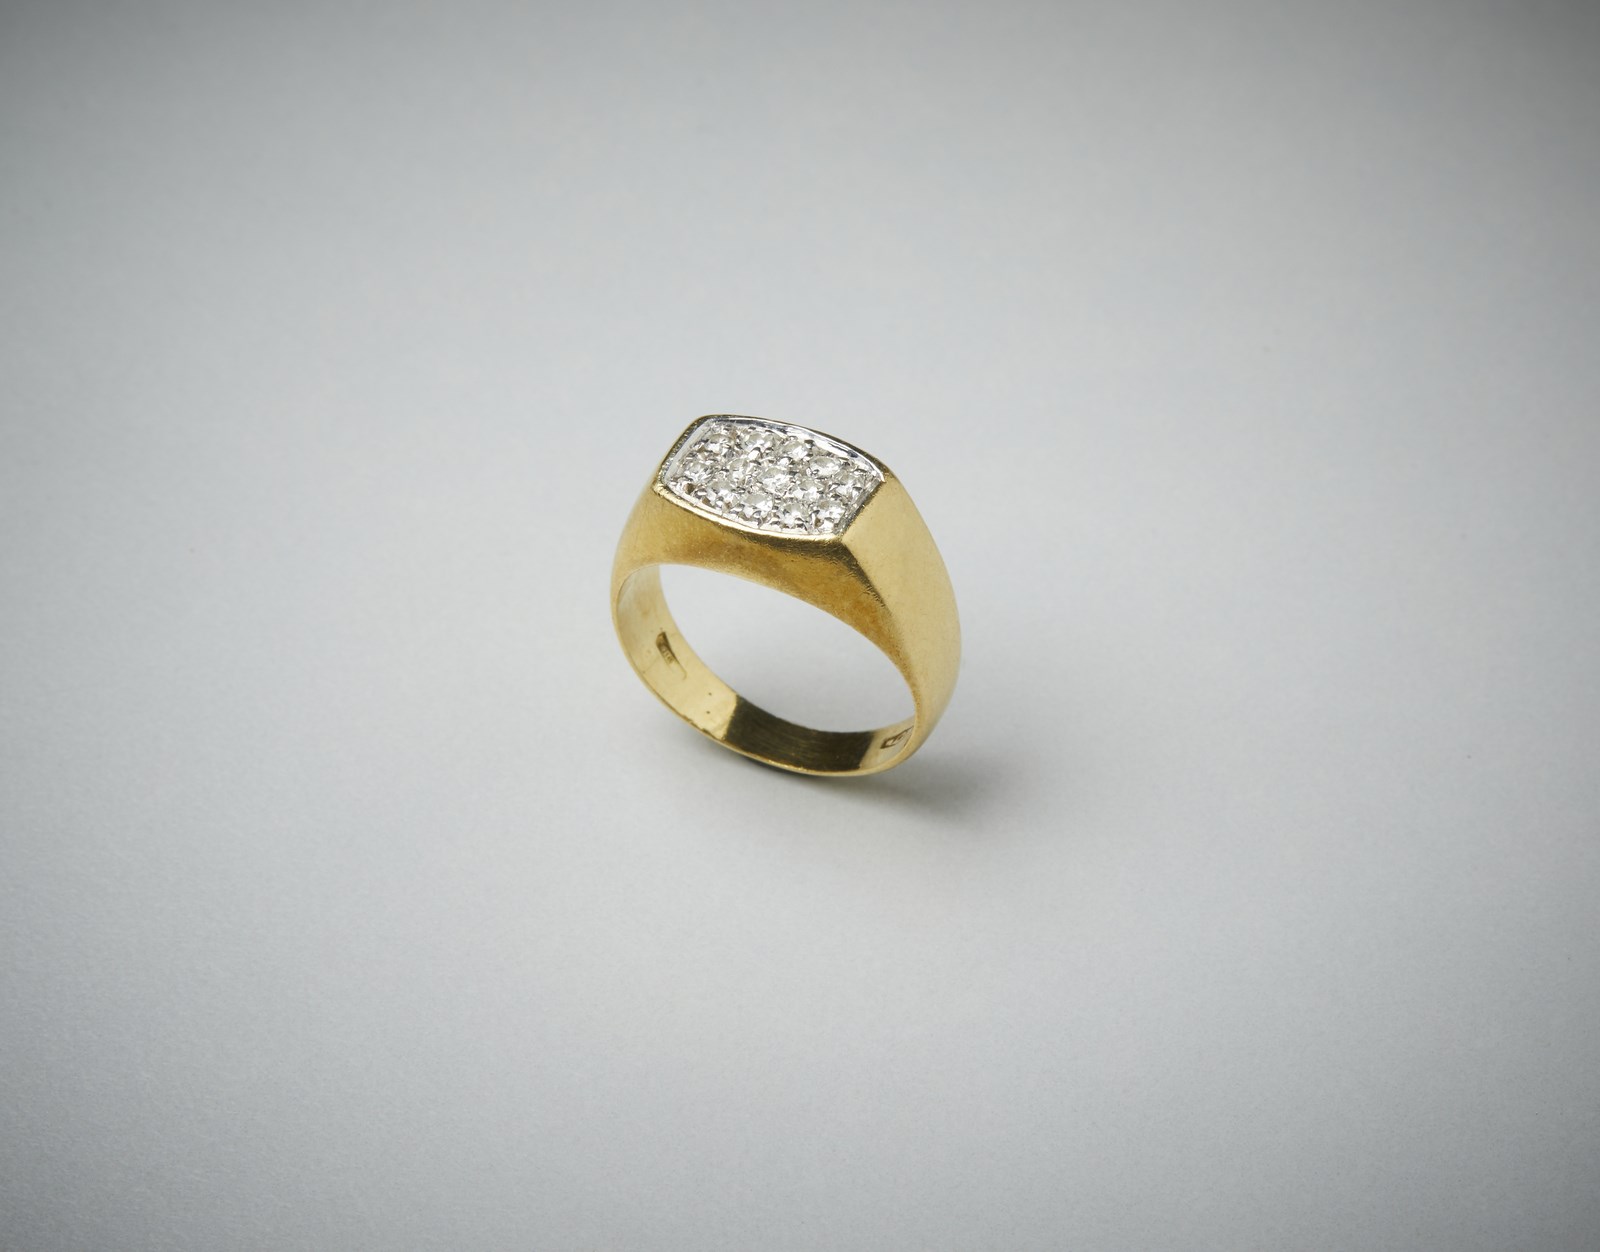 Band ring in yellow gold 750/1000 with white diamonds pavè huit huit cut of 0.40 ct. approx.  (. )